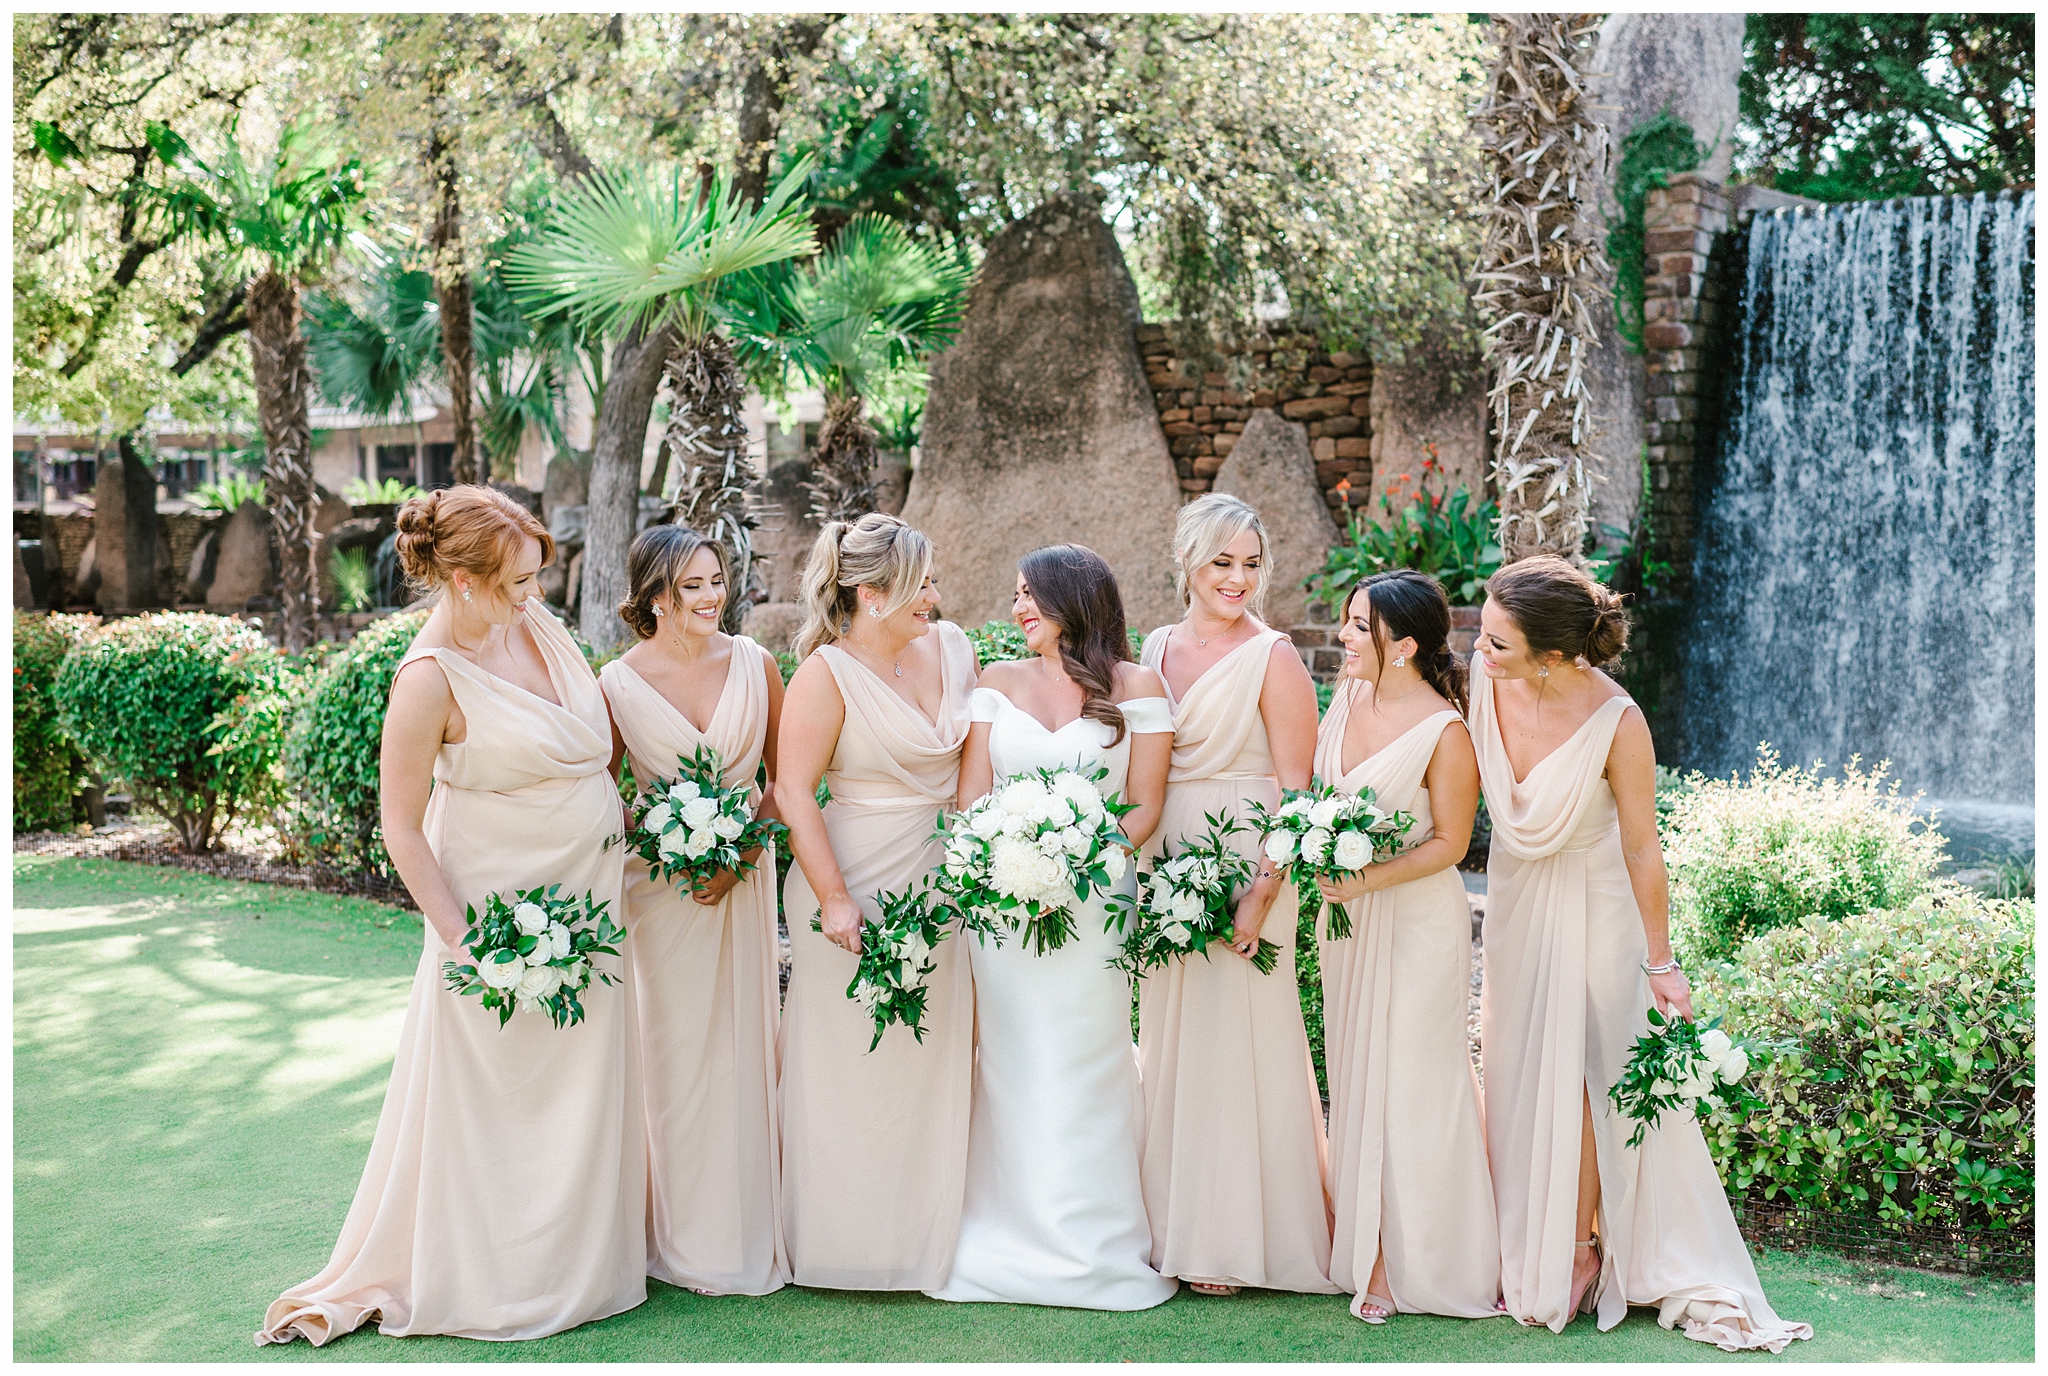 Bridesmaids in Champagne Dresses with Neutral Florals